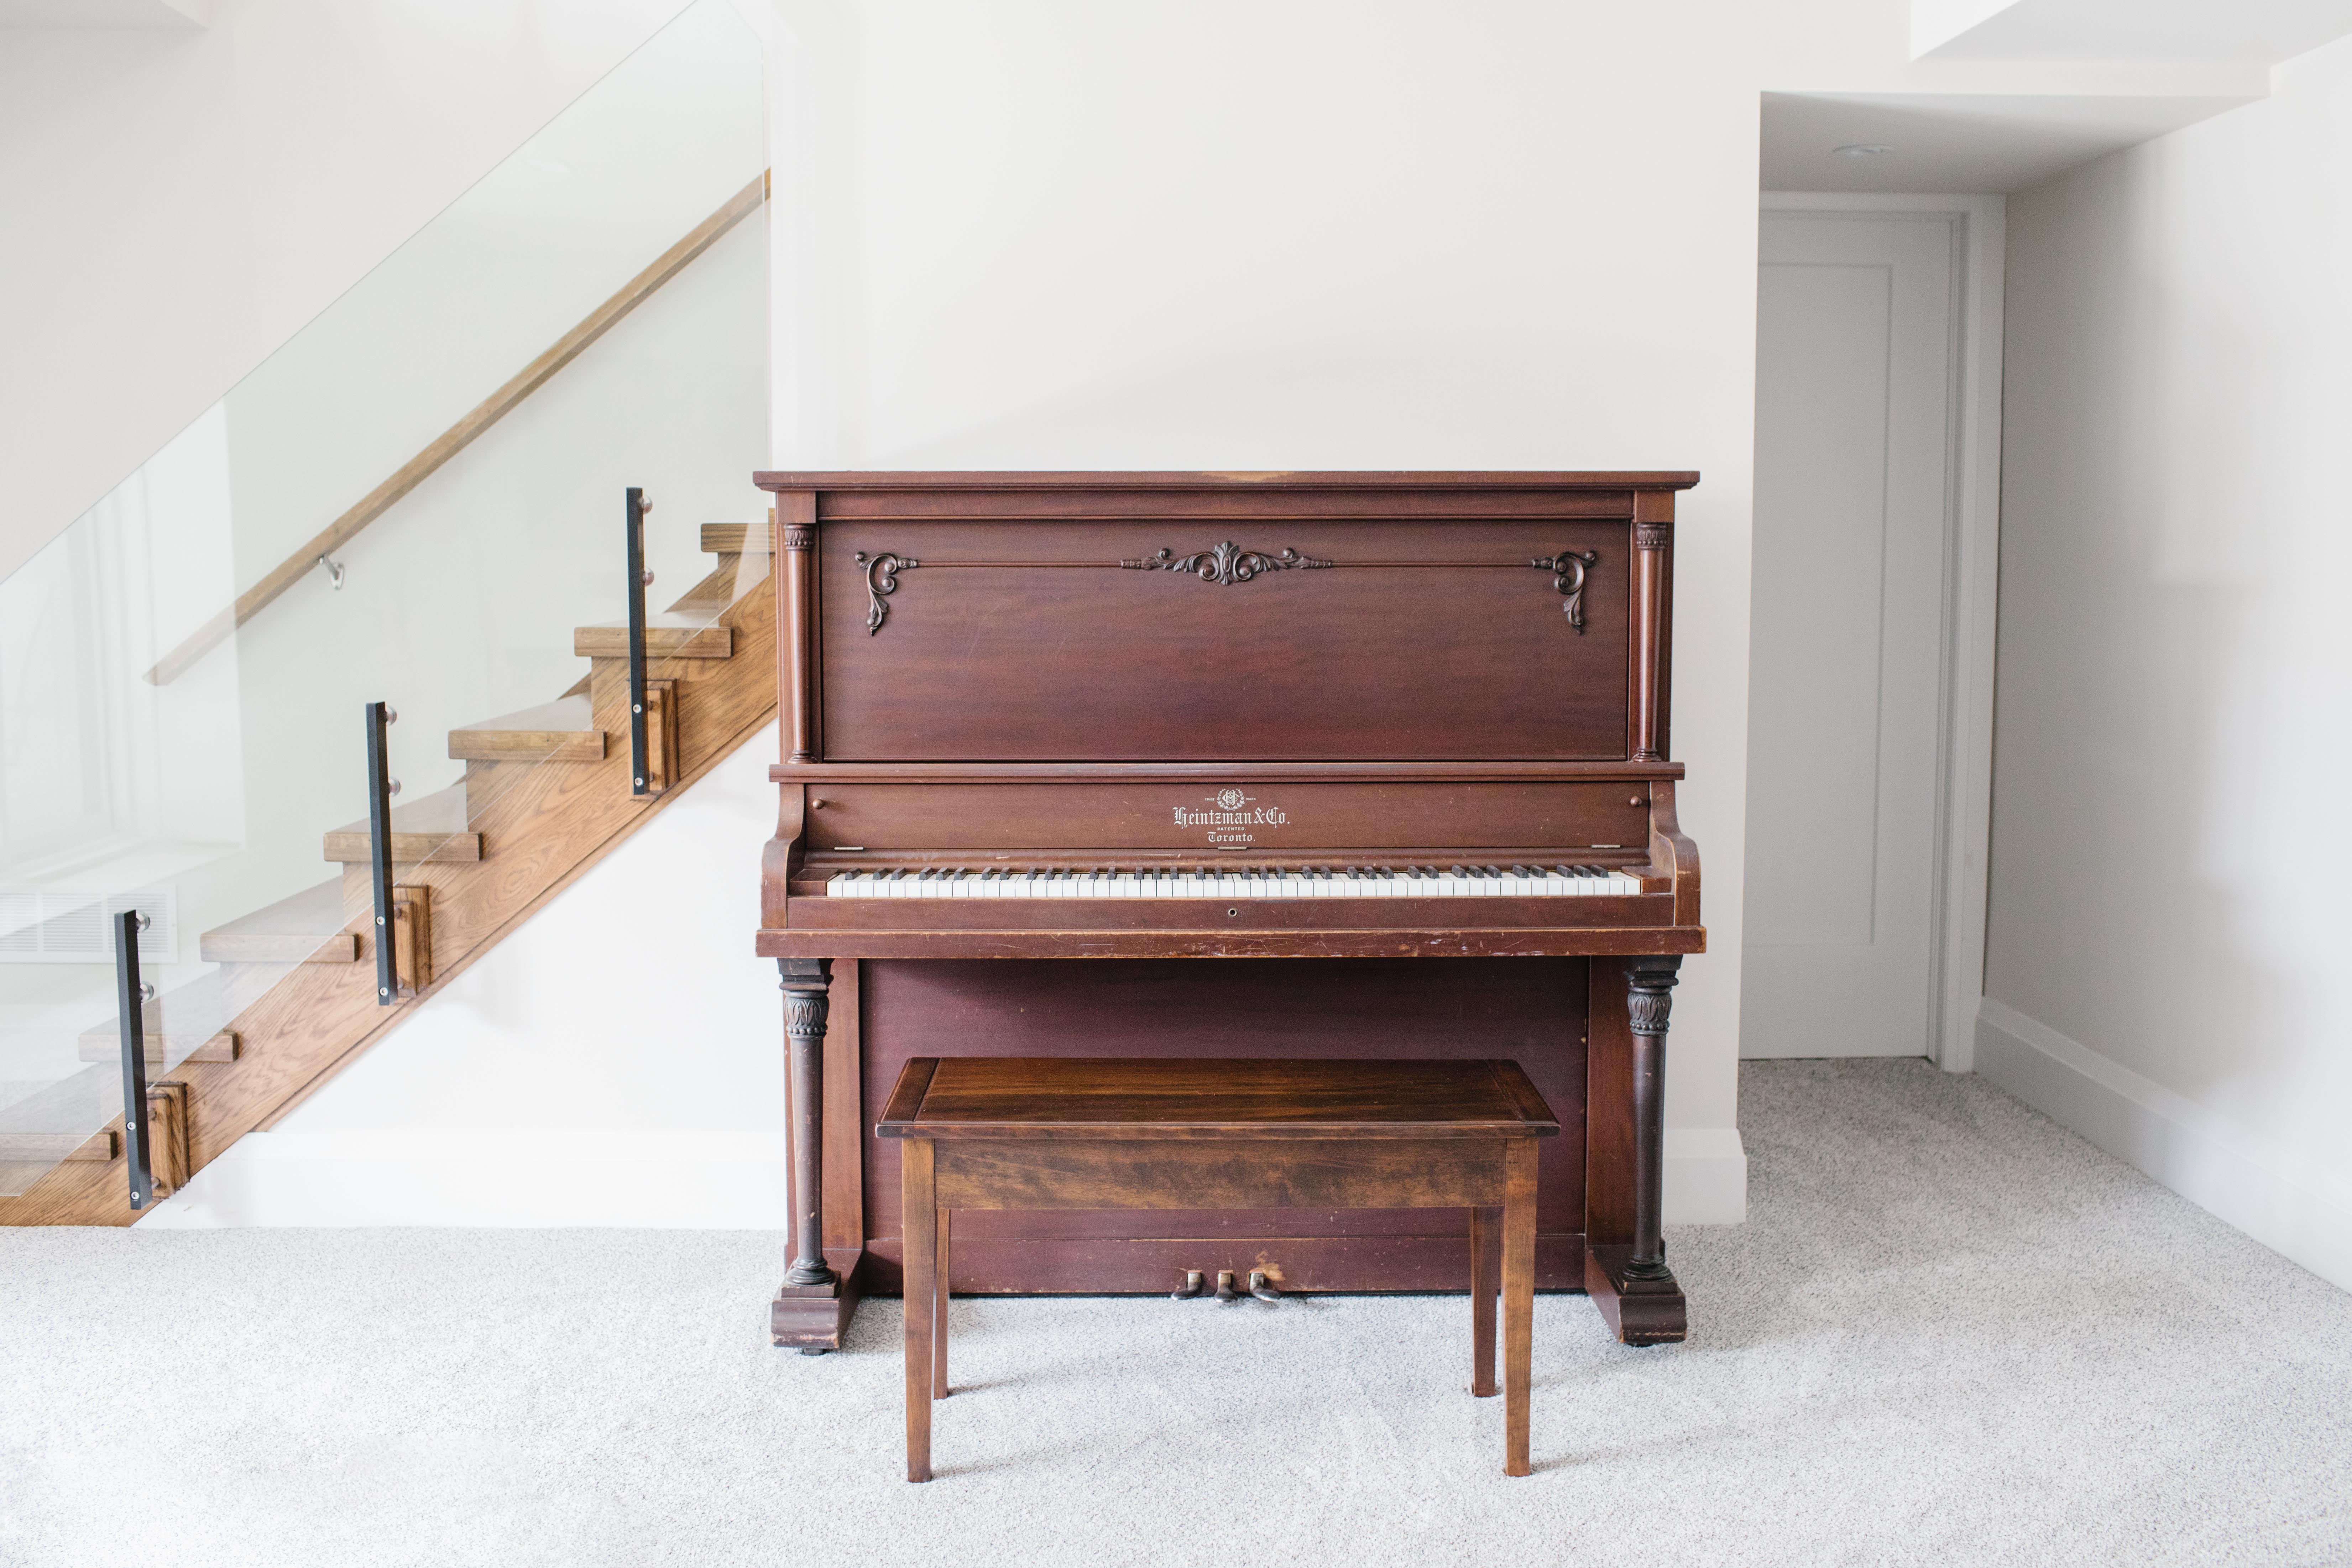 A beautiful antique Heintzman piano sits against a cream coloured wall at the base of a glass staircase. The piano lines up meticulously with the wall.